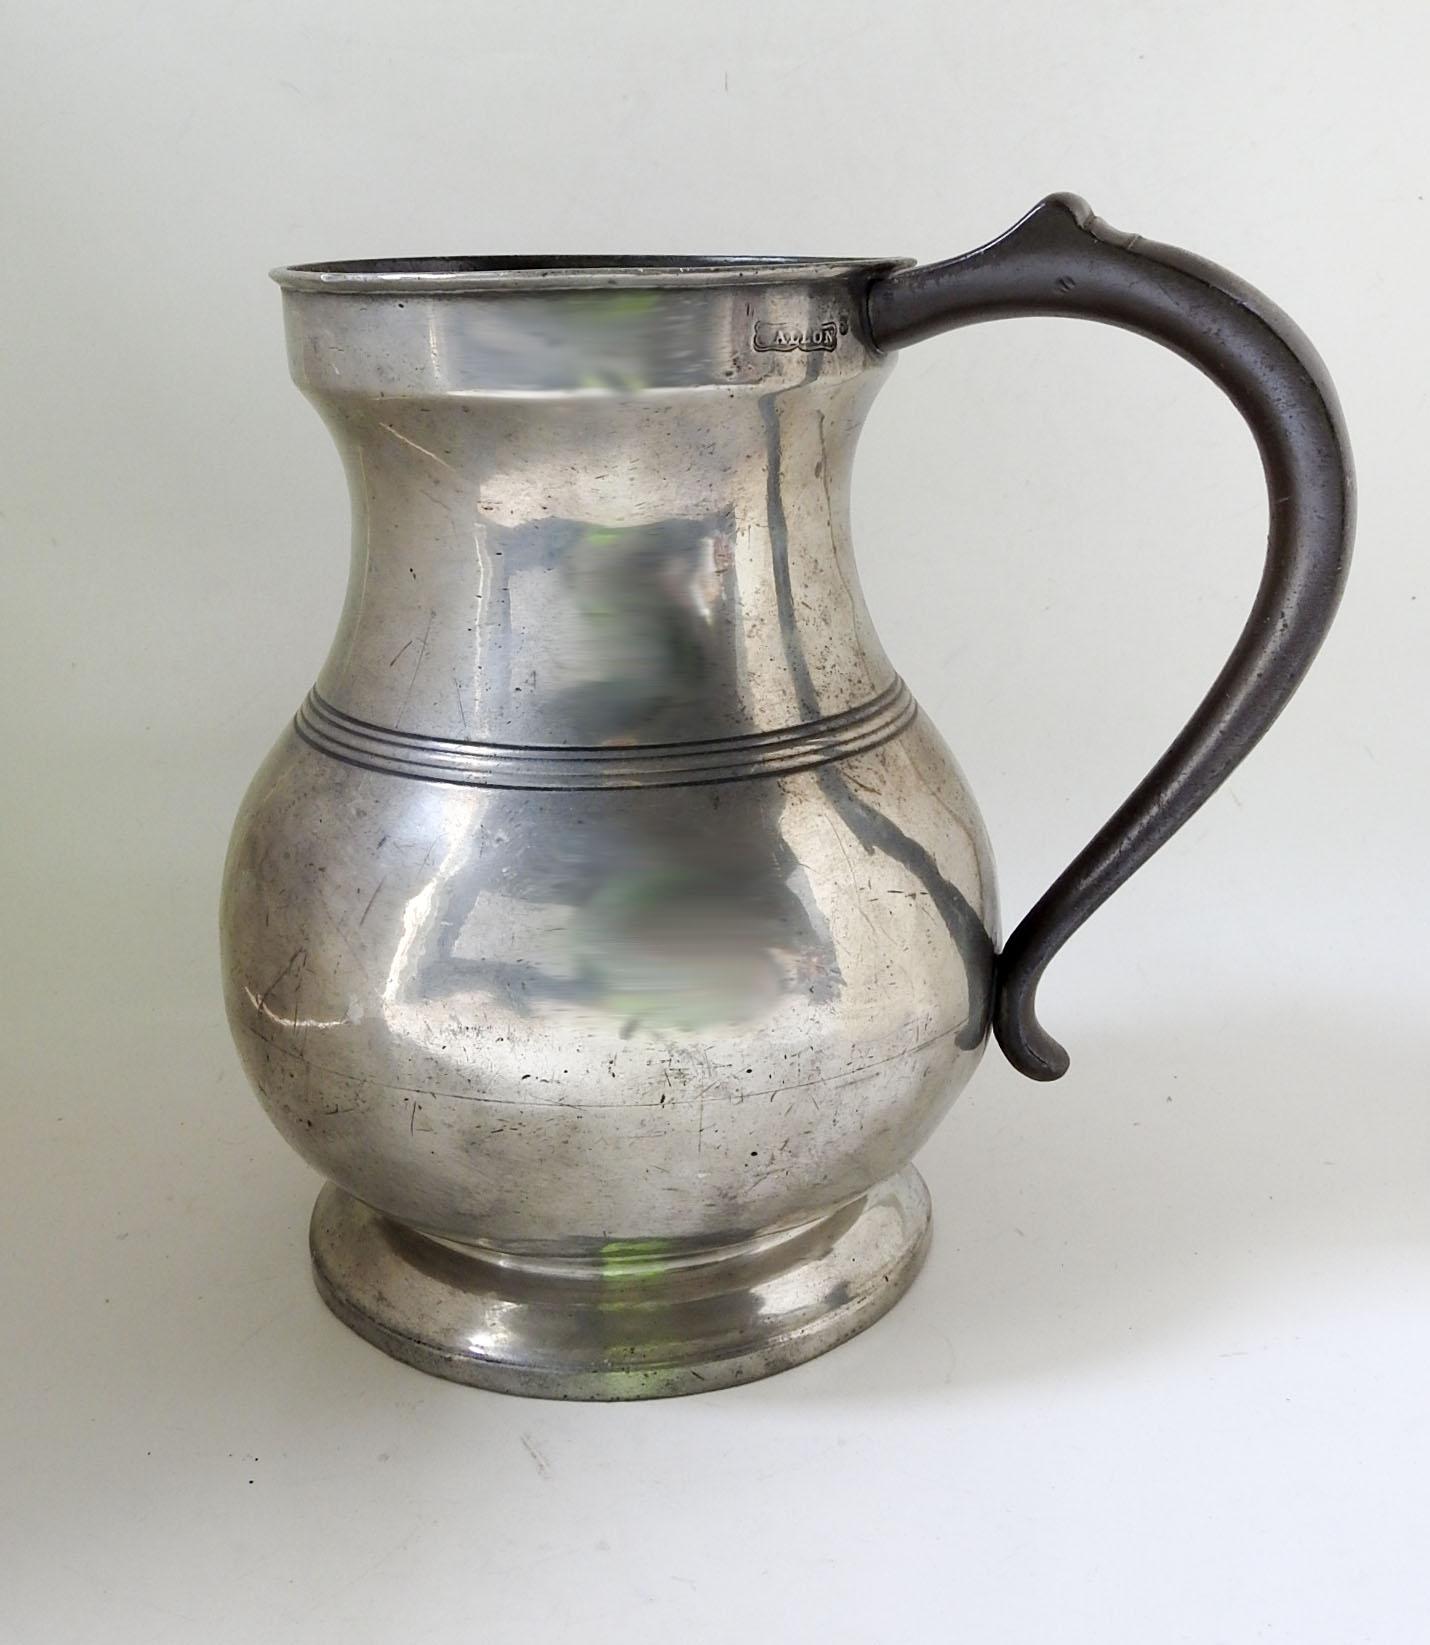 Antique Victorian pewter one gallon potbelly measure. Stamped Gallon, with VR Queen Victoria certification mark. Overall patina, surface scratches, few dings, pretty heavy weighs over 5 lbs.